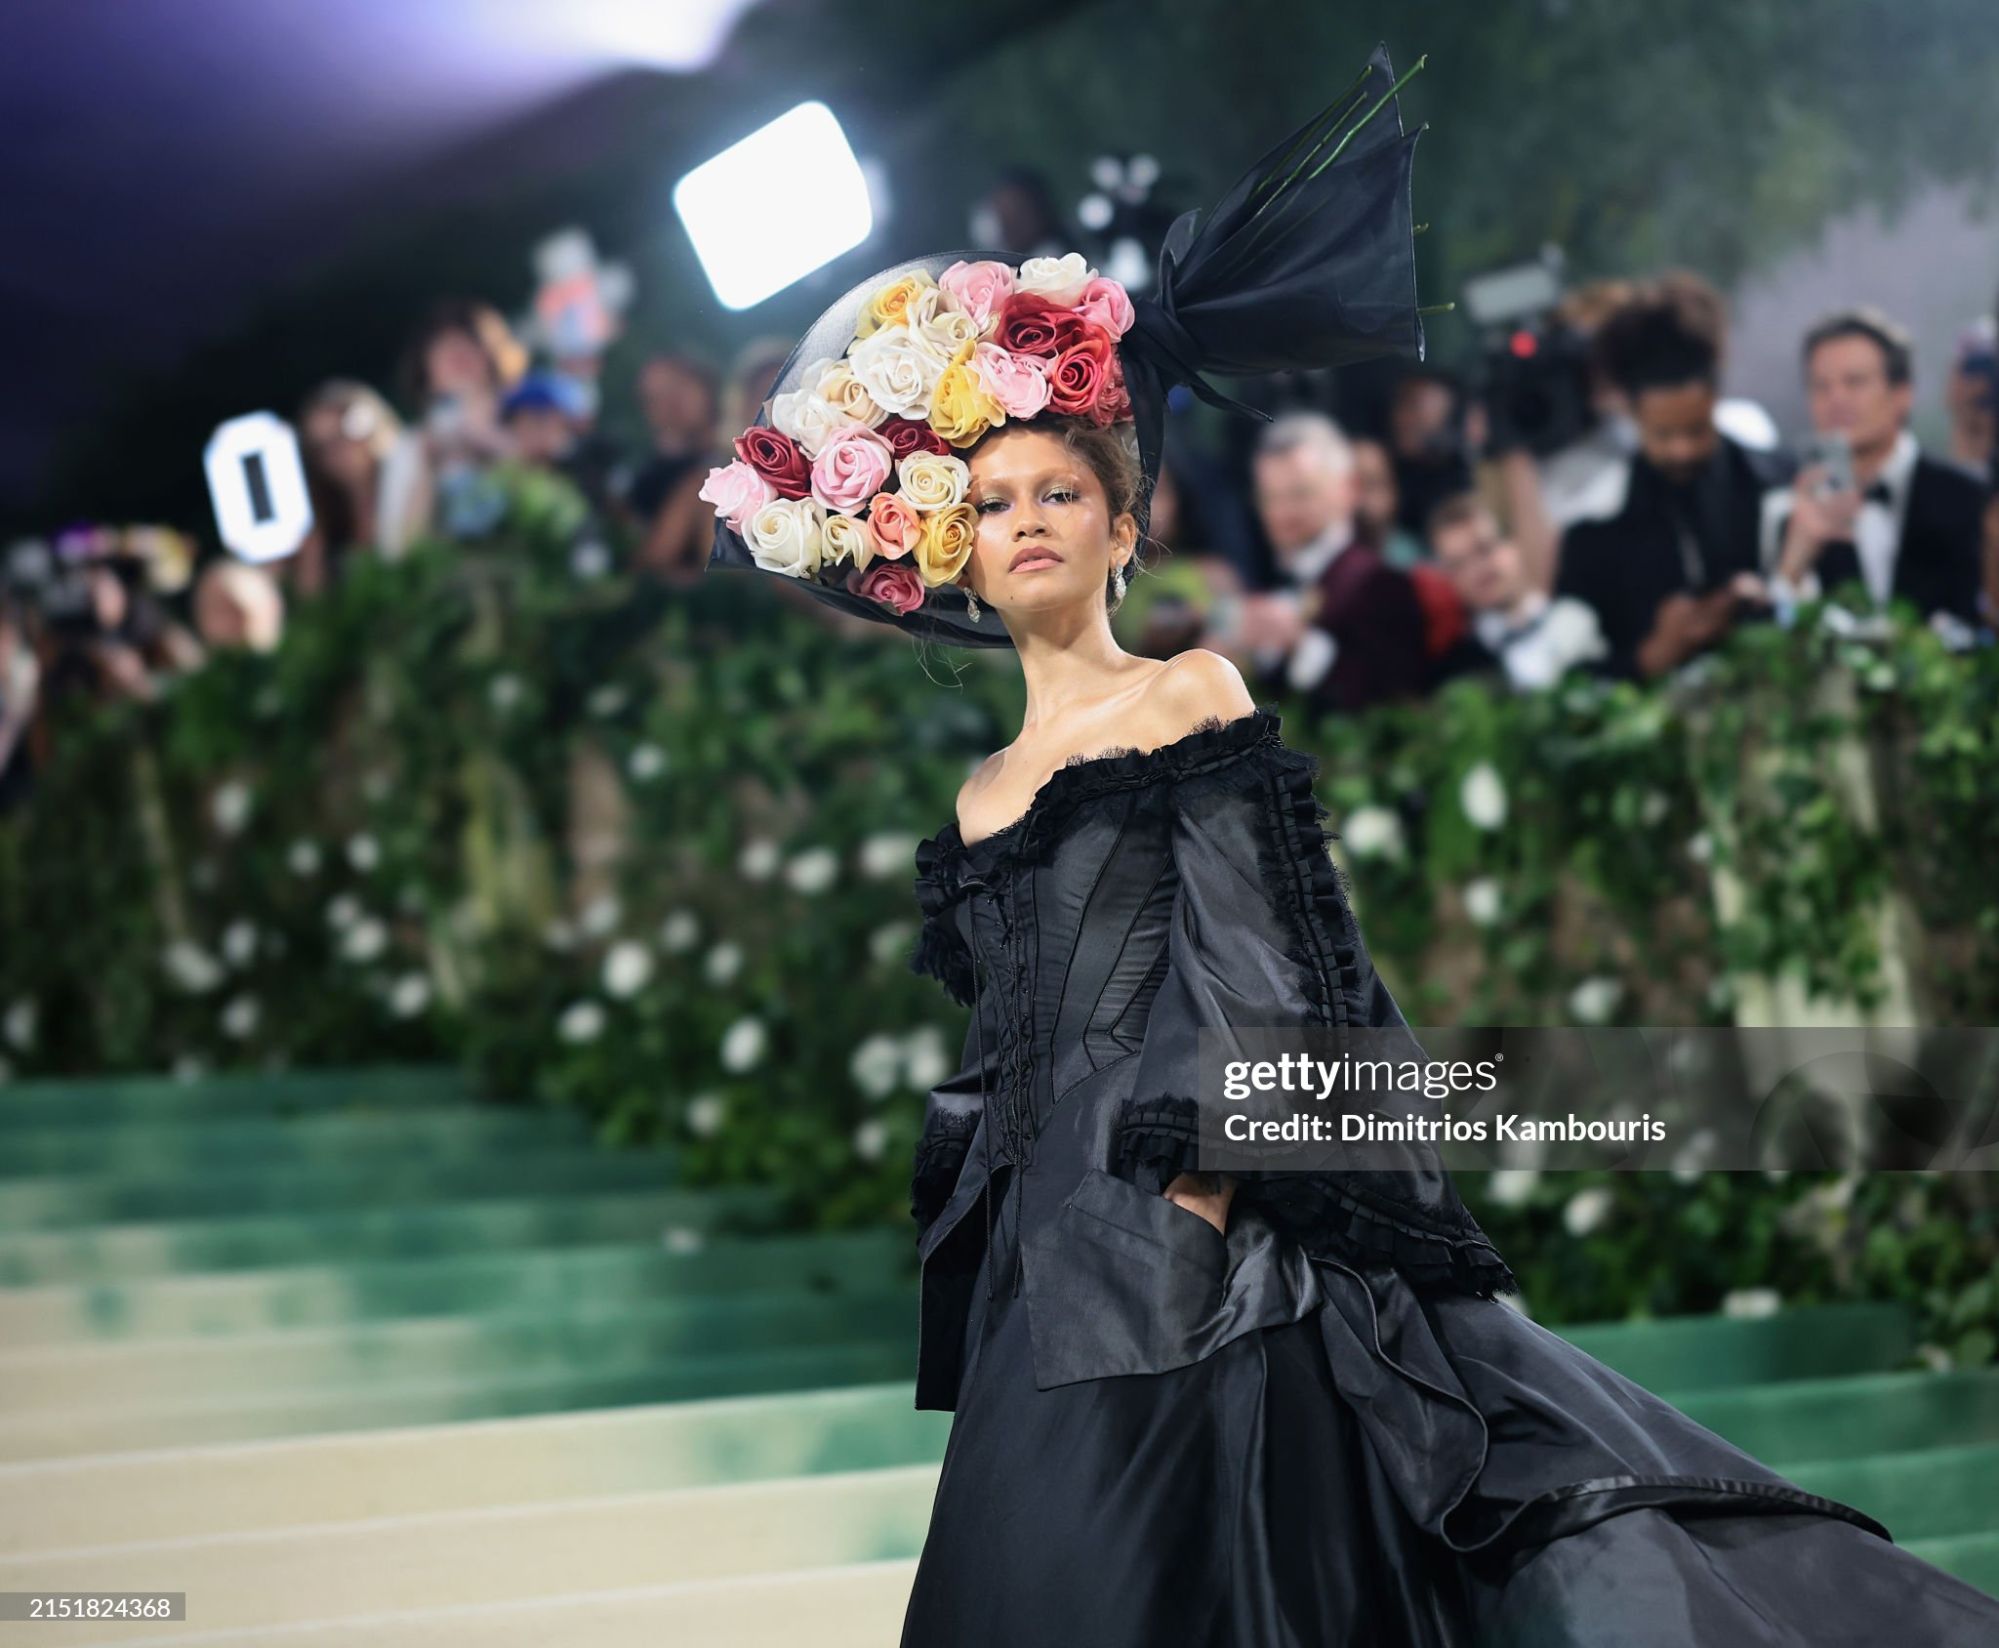 gettyimages-2151824368-2048x2048.jpg